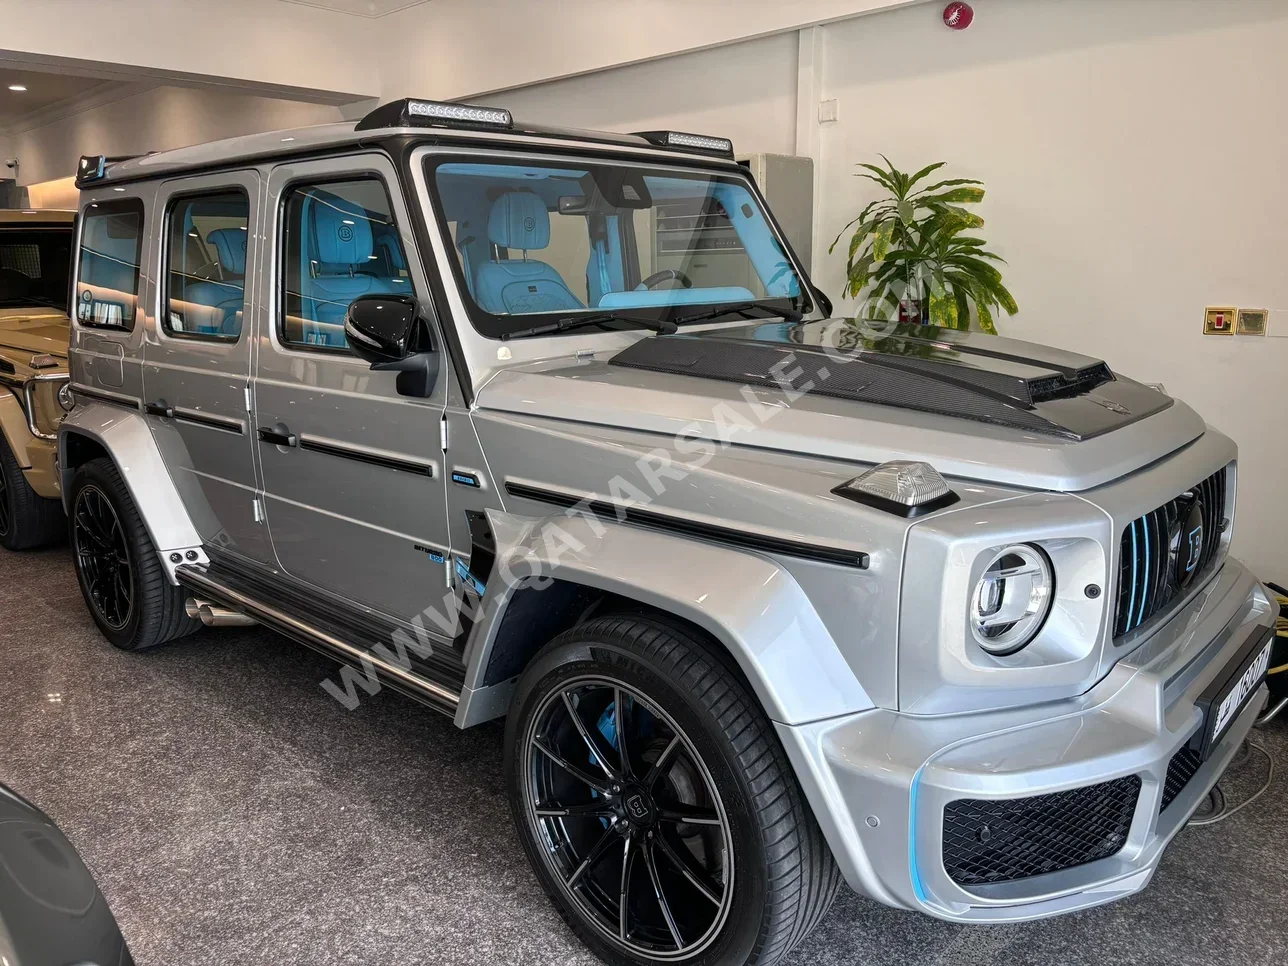  Mercedes-Benz  G-Class  63 Brabus  2019  Automatic  60,000 Km  8 Cylinder  Four Wheel Drive (4WD)  SUV  Silver  With Warranty